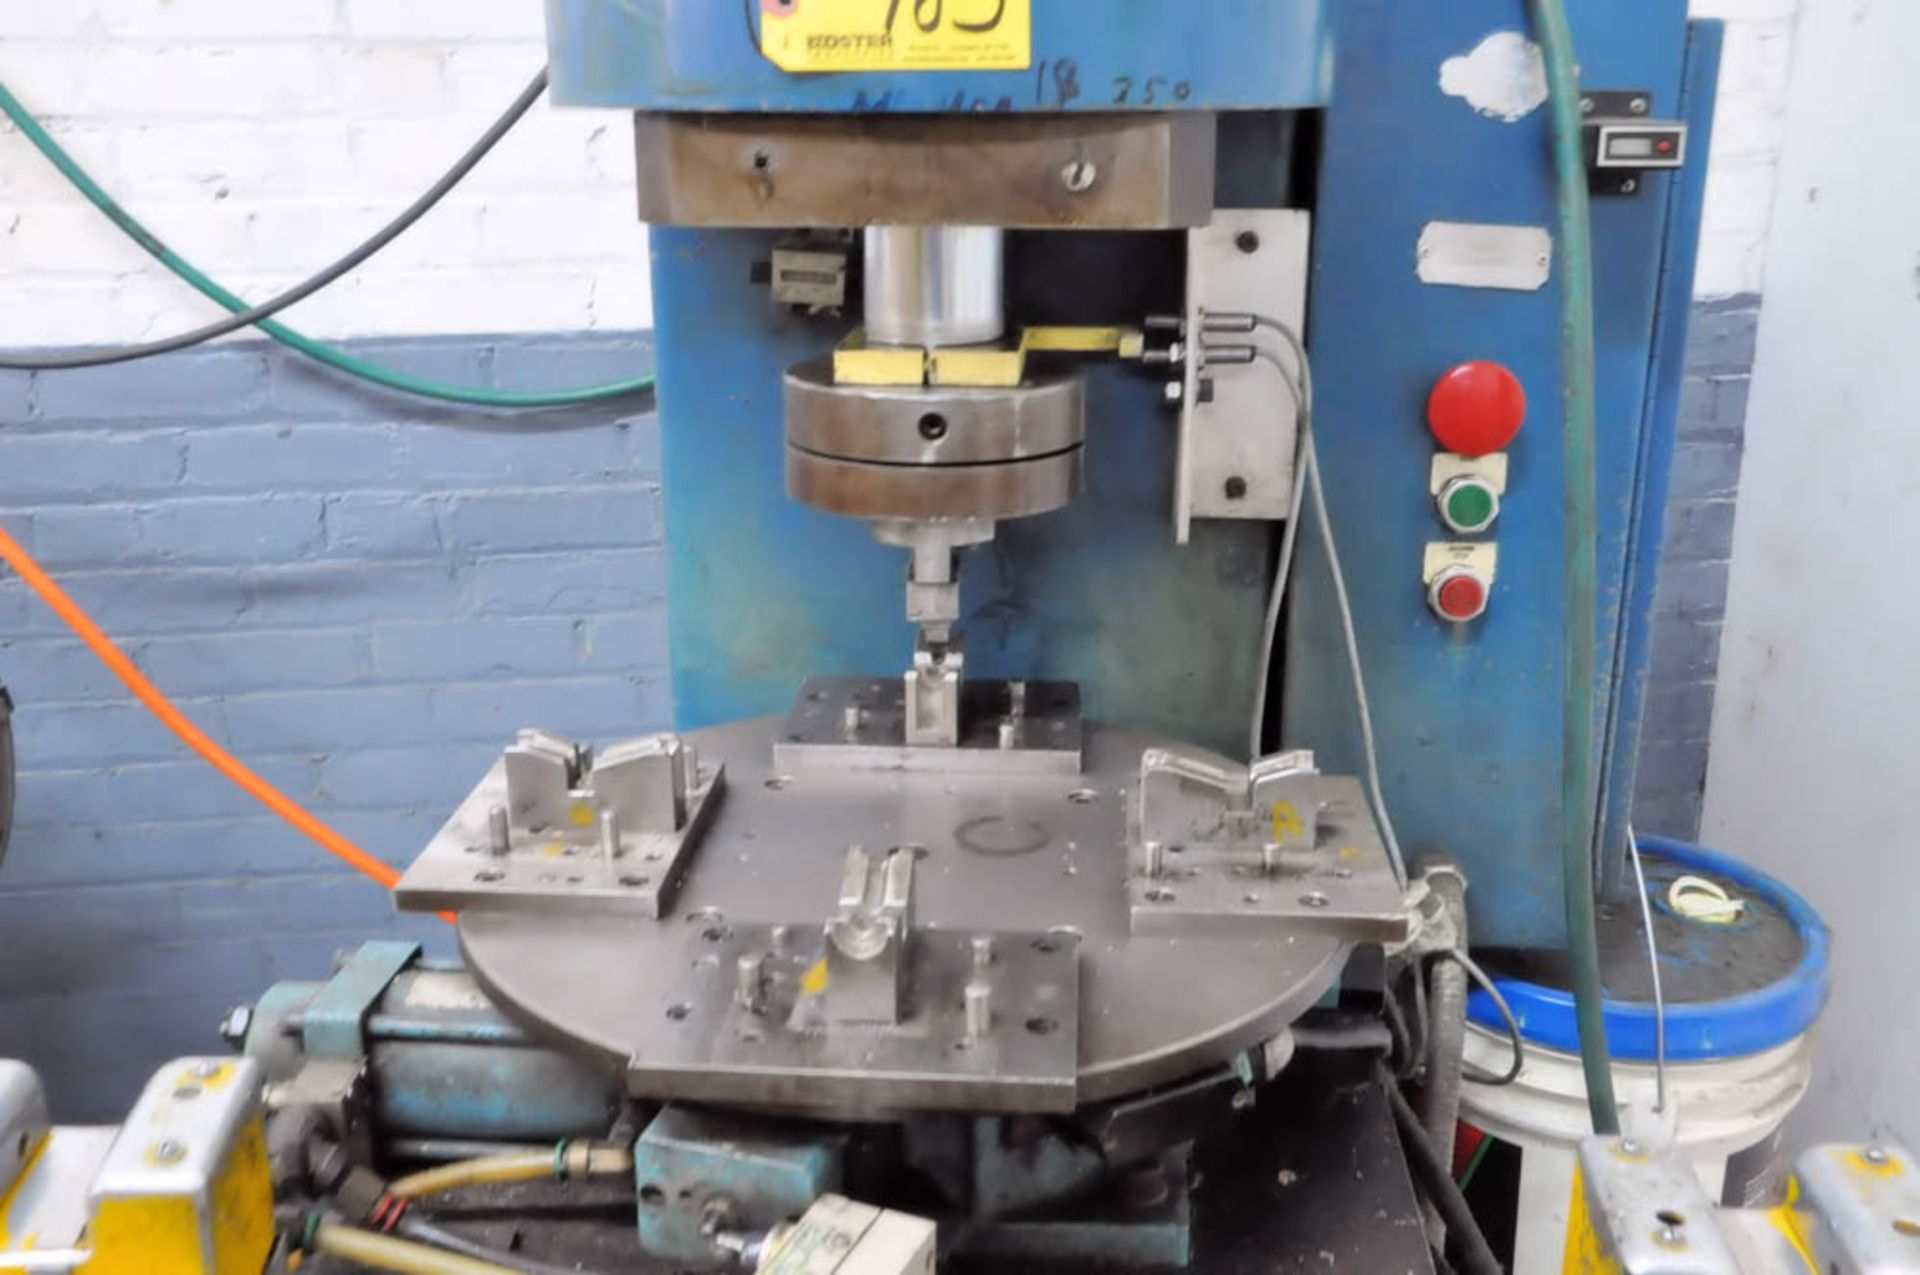 AIR-HYDRAULICS MDL. SH-500, HYDRAULIC STAKING PRESS, S/N:4180/95595, PUSH BUTTON CONTROLS - Image 2 of 3